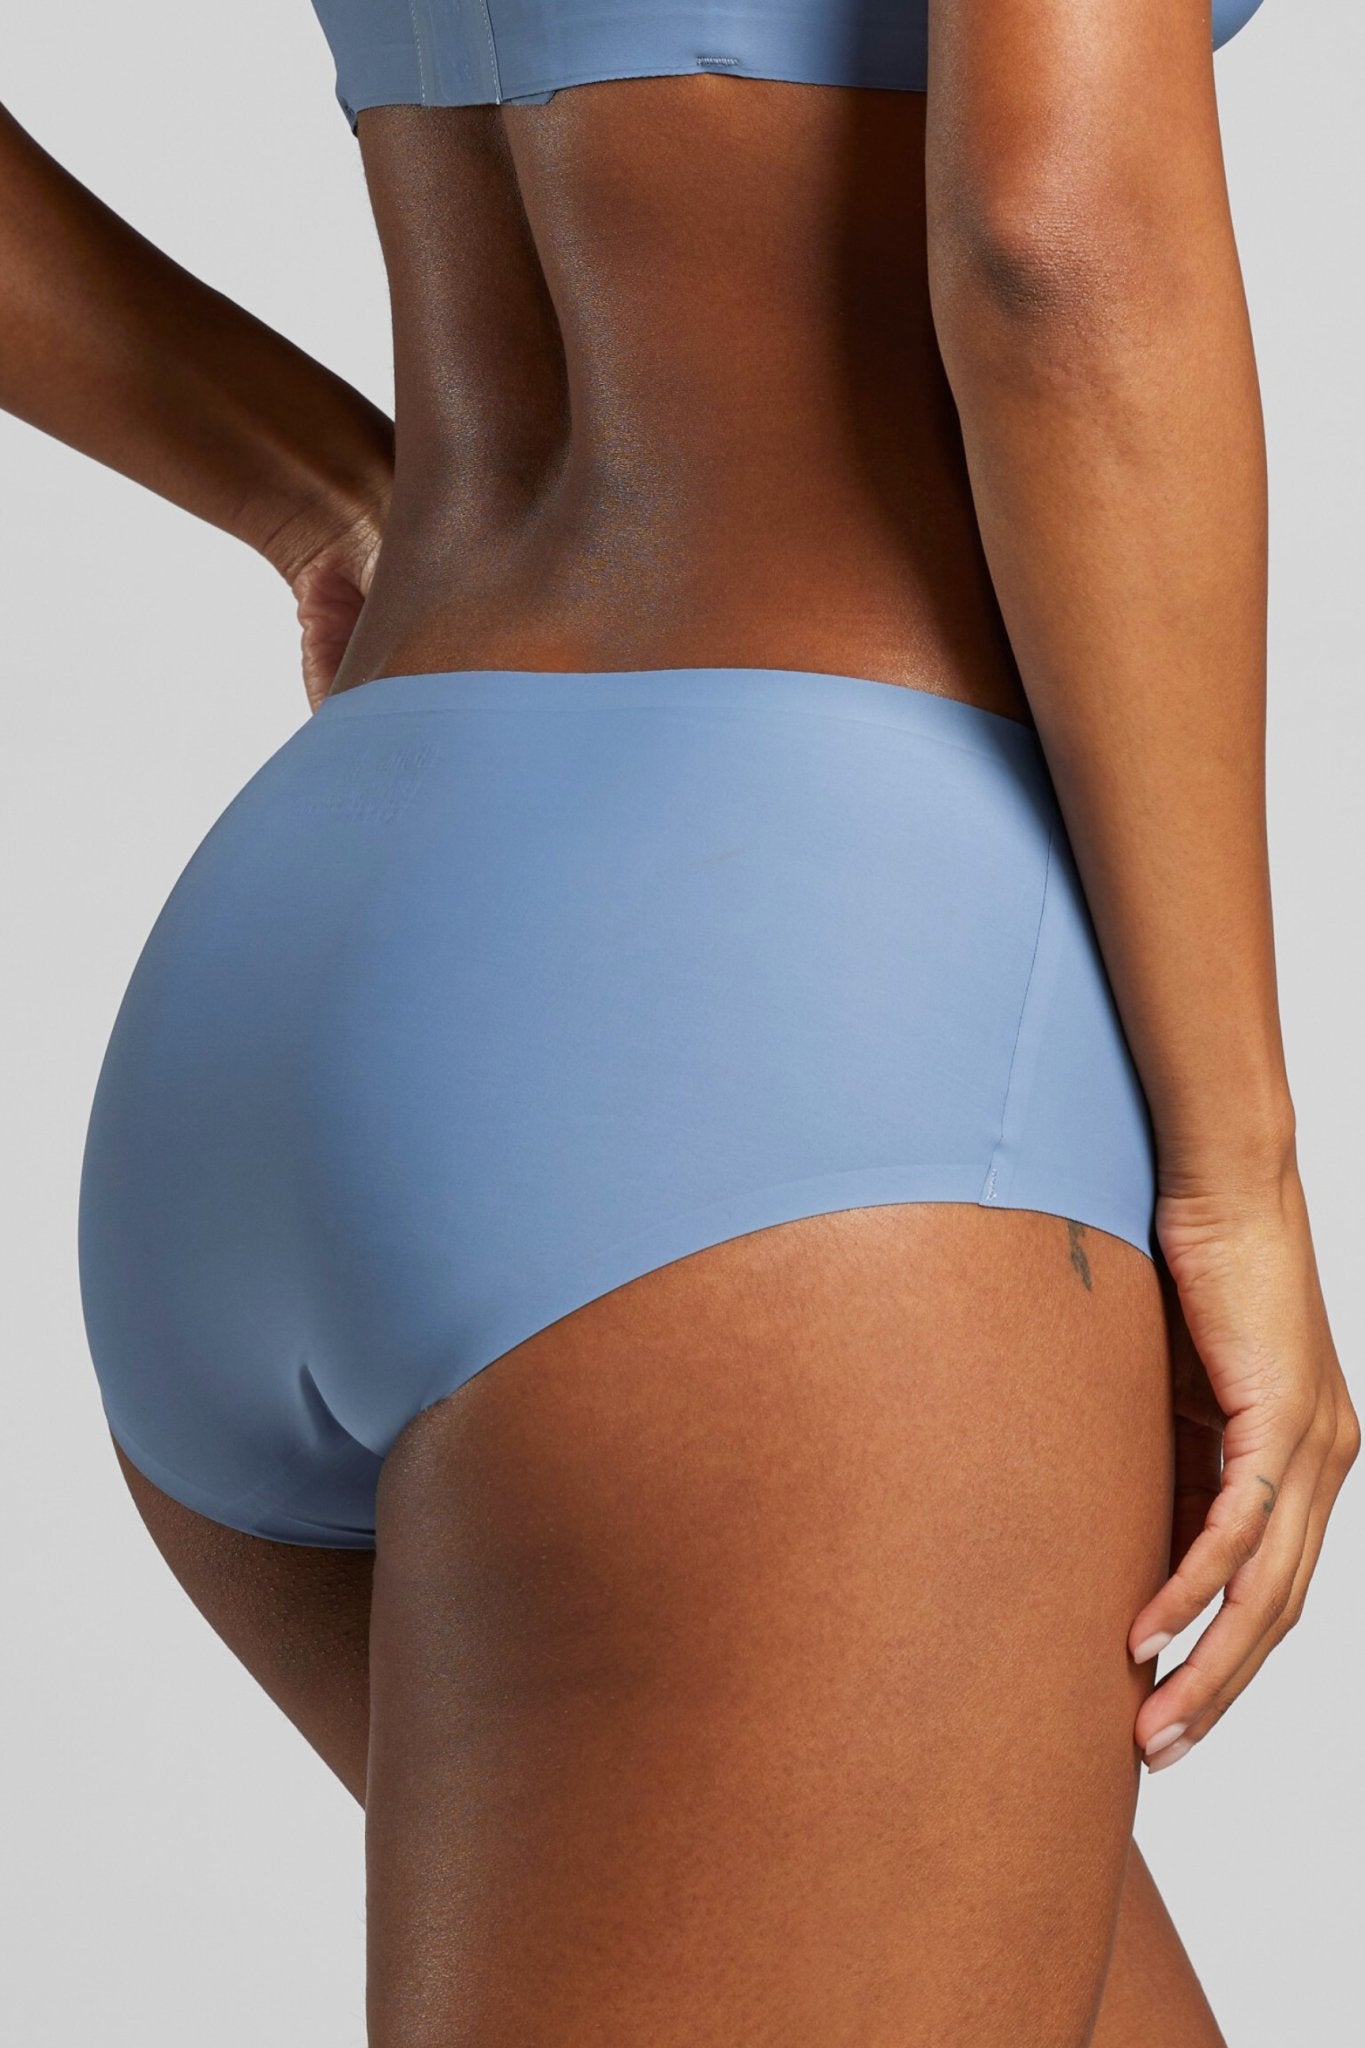 Ultra-smooth soft fabric No visible panty lines with special bonded-no sew  technology